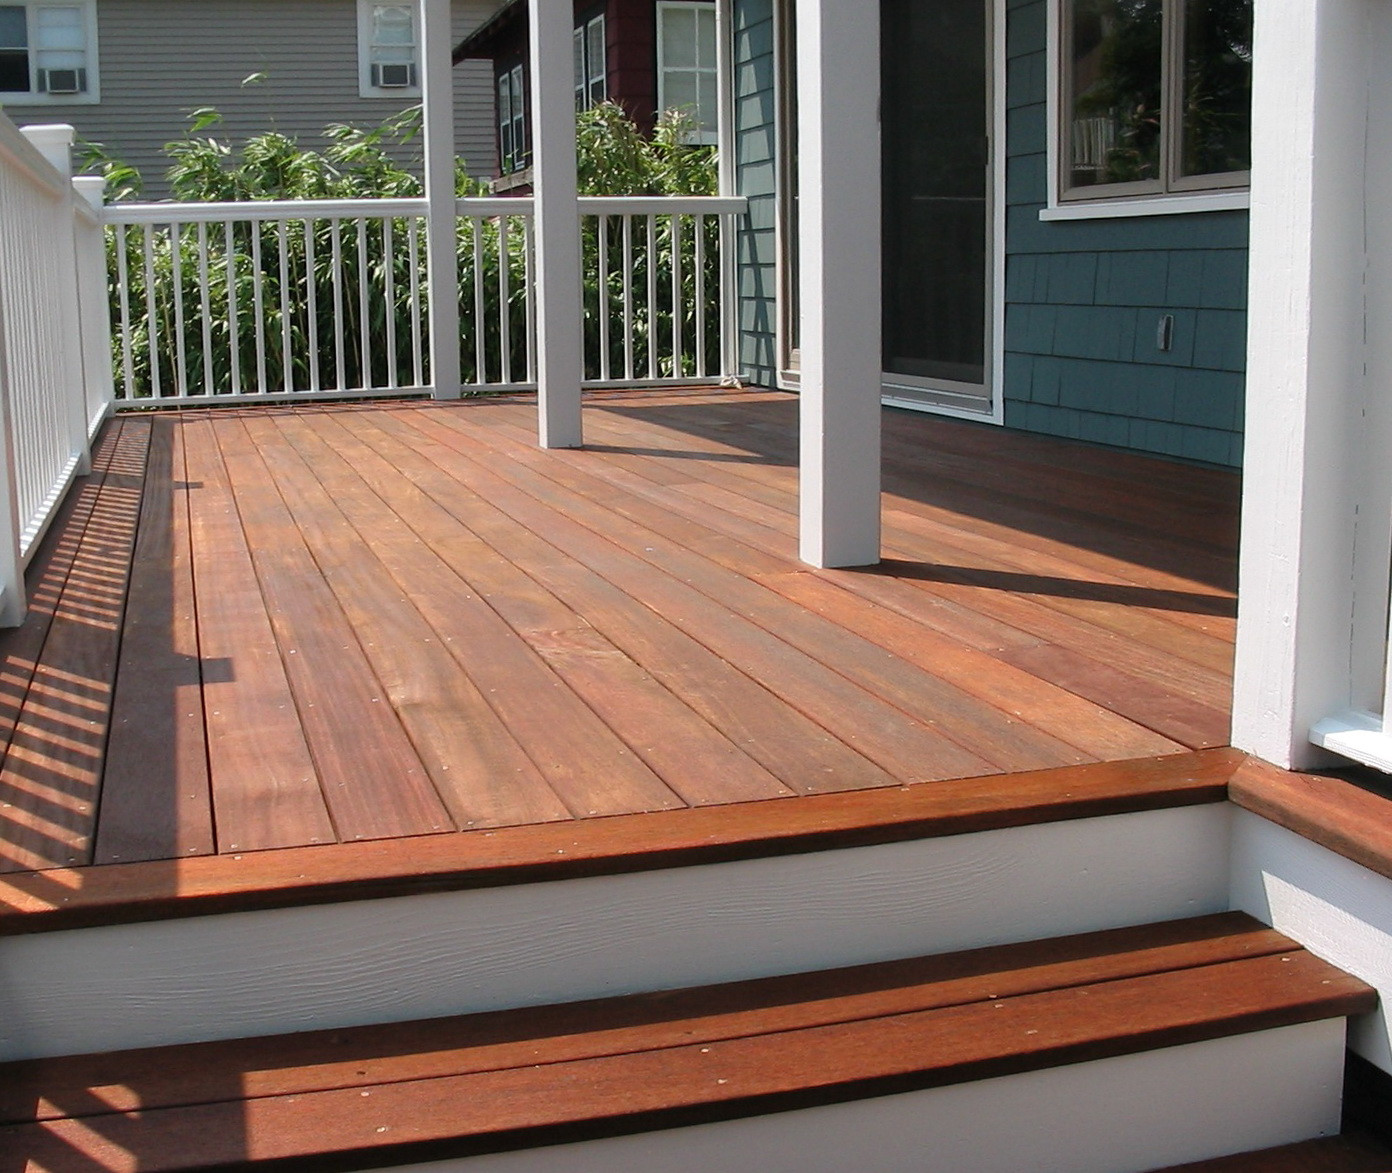 Paint Or Stain Deck
 Solid Deck Stain Vs Paint